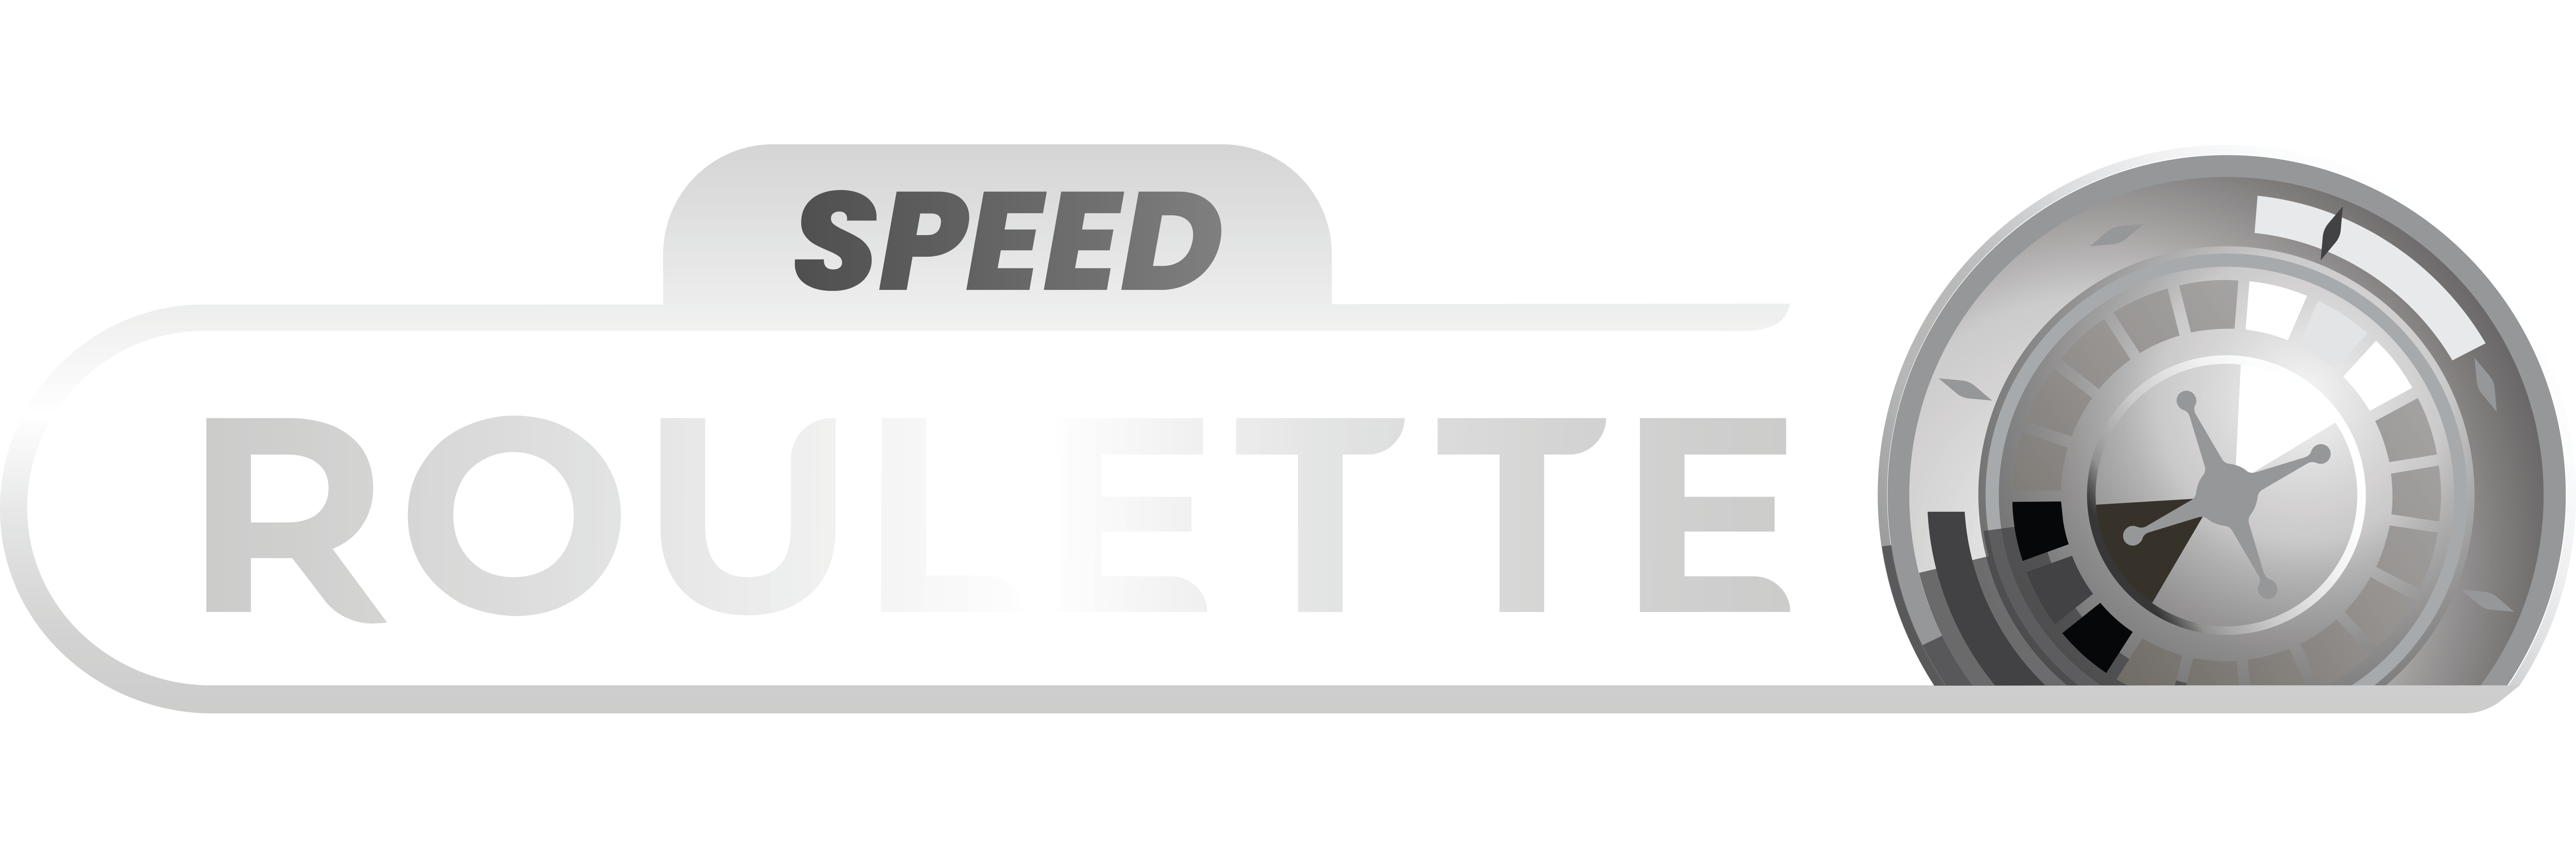 Live Speed Roulette game logo